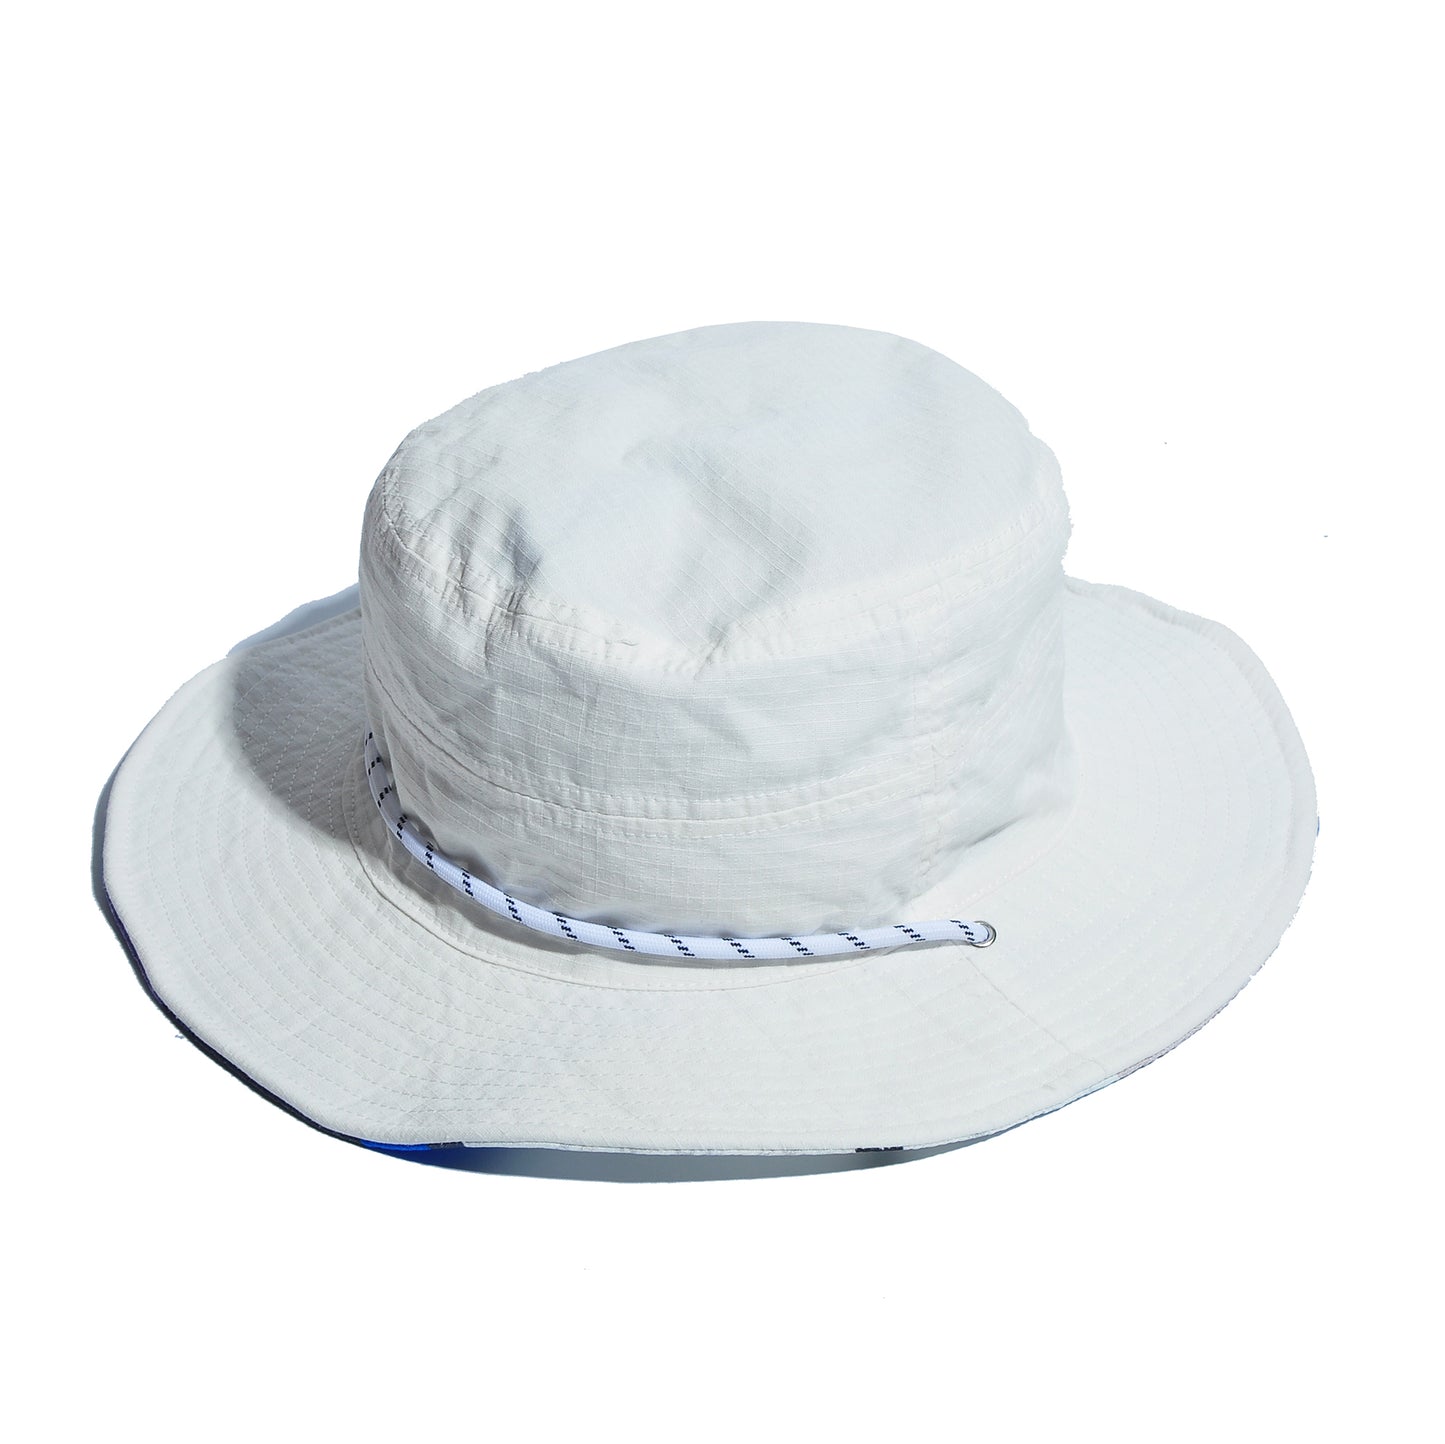 SUBLIME Joint R/hat Ss19